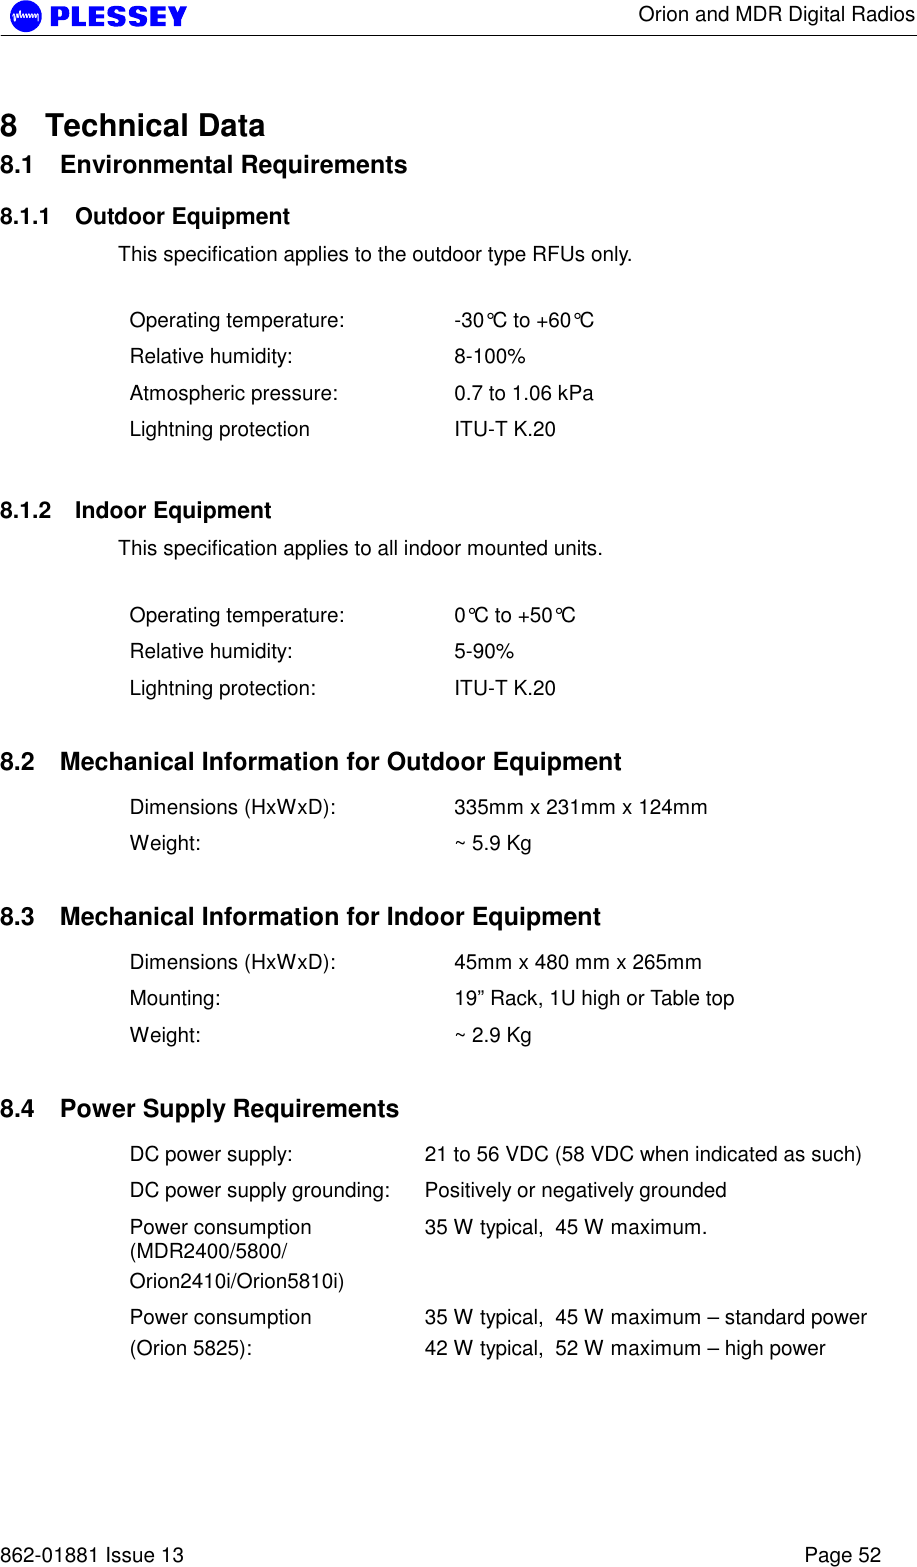      Orion and MDR Digital Radios   862-01881 Issue 13    Page 52 8 Technical Data 8.1 Environmental Requirements 8.1.1 Outdoor Equipment This specification applies to the outdoor type RFUs only.  Operating temperature:  -30°C to +60°C Relative humidity:  8-100% Atmospheric pressure:  0.7 to 1.06 kPa Lightning protection  ITU-T K.20 8.1.2 Indoor Equipment This specification applies to all indoor mounted units.  Operating temperature:  0°C to +50°C Relative humidity:  5-90% Lightning protection:  ITU-T K.20  8.2  Mechanical Information for Outdoor Equipment Dimensions (HxWxD):  335mm x 231mm x 124mm Weight:  ~ 5.9 Kg  8.3  Mechanical Information for Indoor Equipment Dimensions (HxWxD):  45mm x 480 mm x 265mm Mounting:  19” Rack, 1U high or Table top Weight:  ~ 2.9 Kg  8.4  Power Supply Requirements DC power supply:  21 to 56 VDC (58 VDC when indicated as such) DC power supply grounding:  Positively or negatively grounded Power consumption (MDR2400/5800/ Orion2410i/Orion5810i) 35 W typical,  45 W maximum. Power consumption  (Orion 5825): 35 W typical,  45 W maximum – standard power 42 W typical,  52 W maximum – high power  